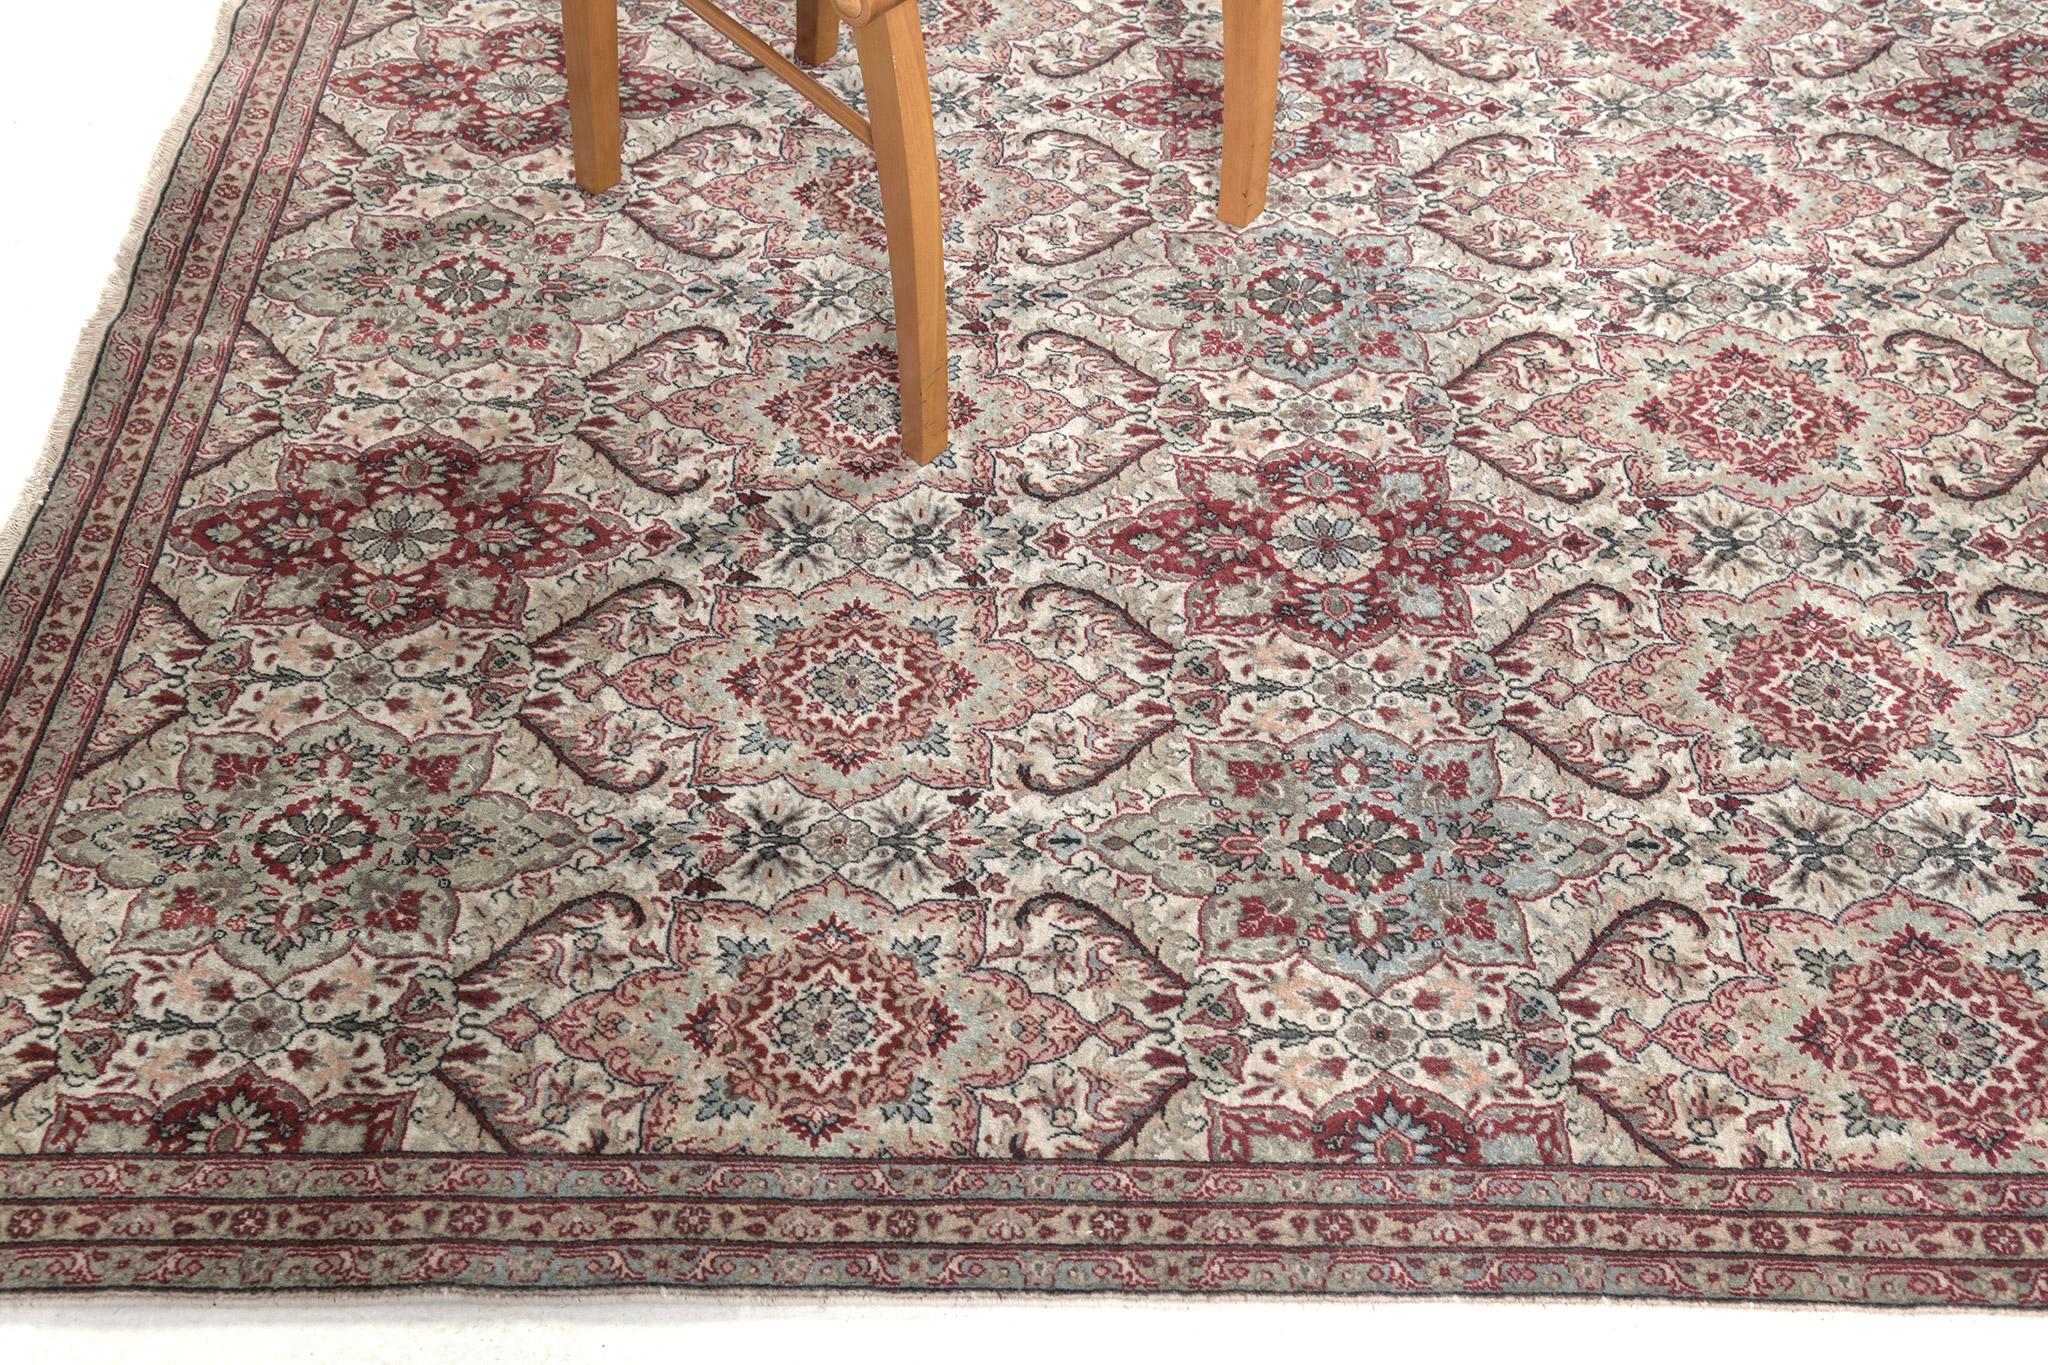 With its classy beauty and sophisticated vibe, this Antique Turkish Sivas rug features an all-over florid elements of rosettes, sprigs, blooming palmettes, and arabesque vinery. Highlighting the majestic tones of elegant colour scheme composed of